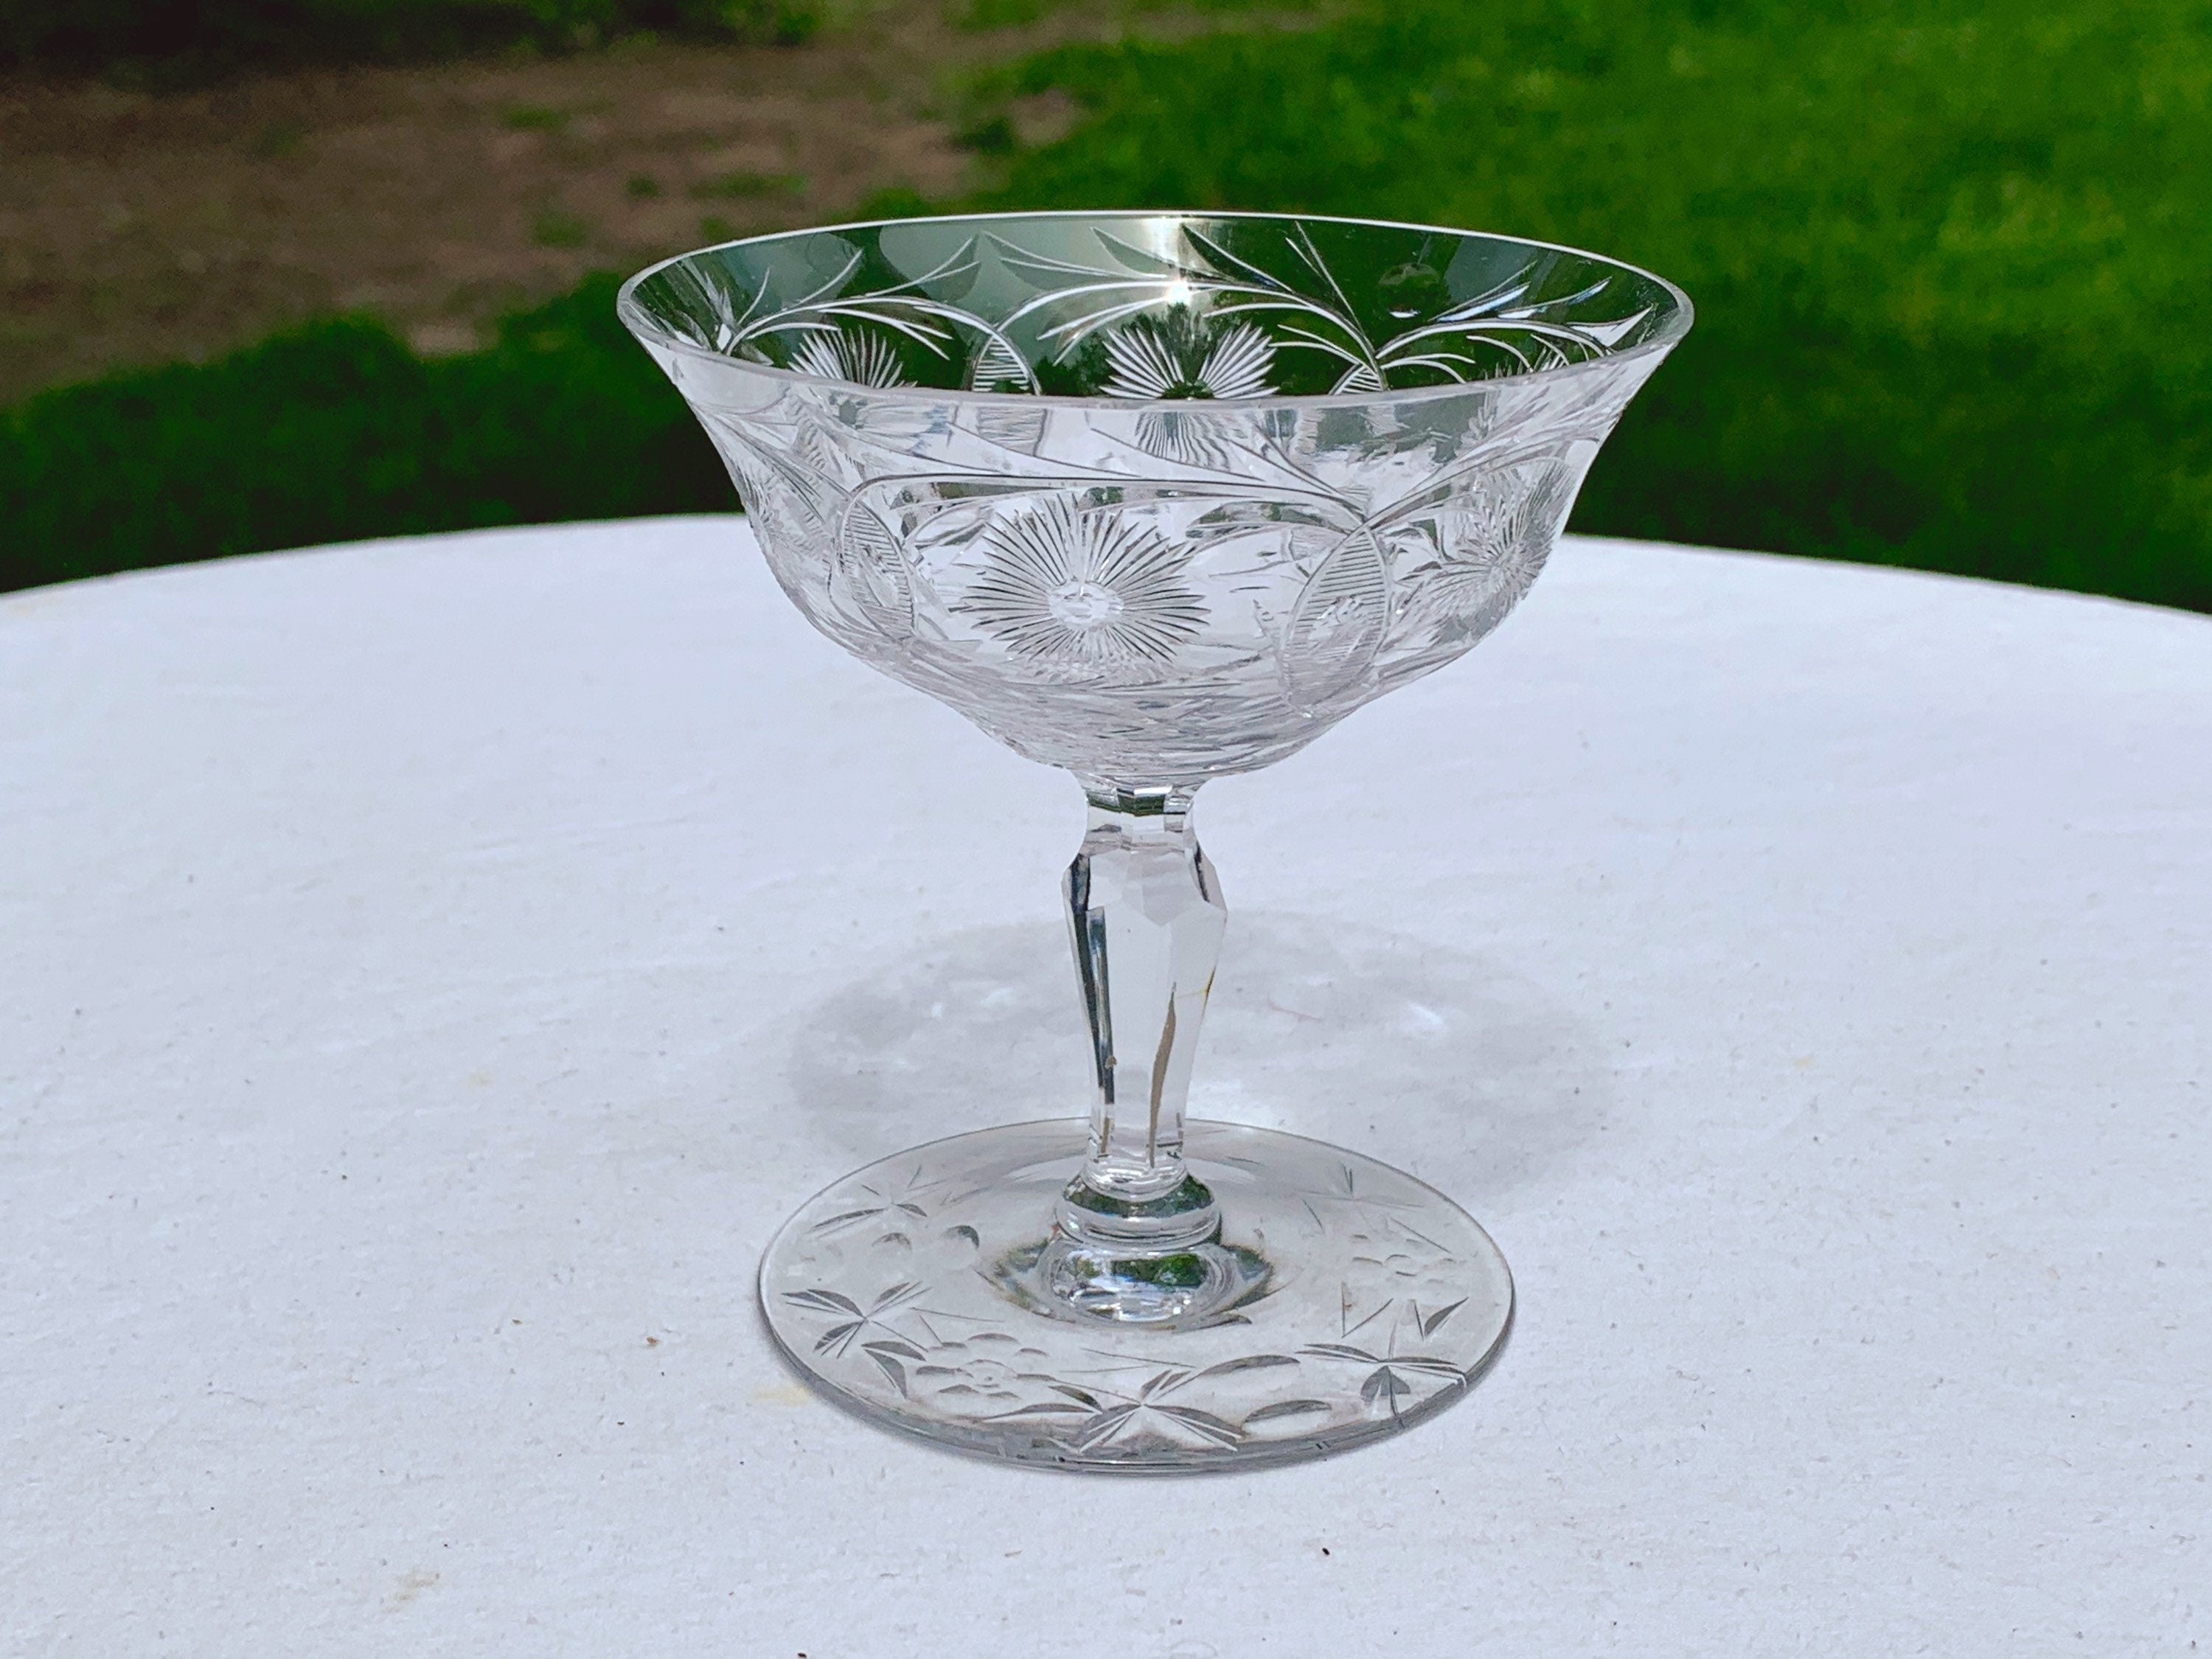 Vintage Etched Clear Crystal Champagne Coupe Glasses | Floral Etched Pattern Craft Cocktail Glasses Barware in Set of 2, 4, 6 or 9